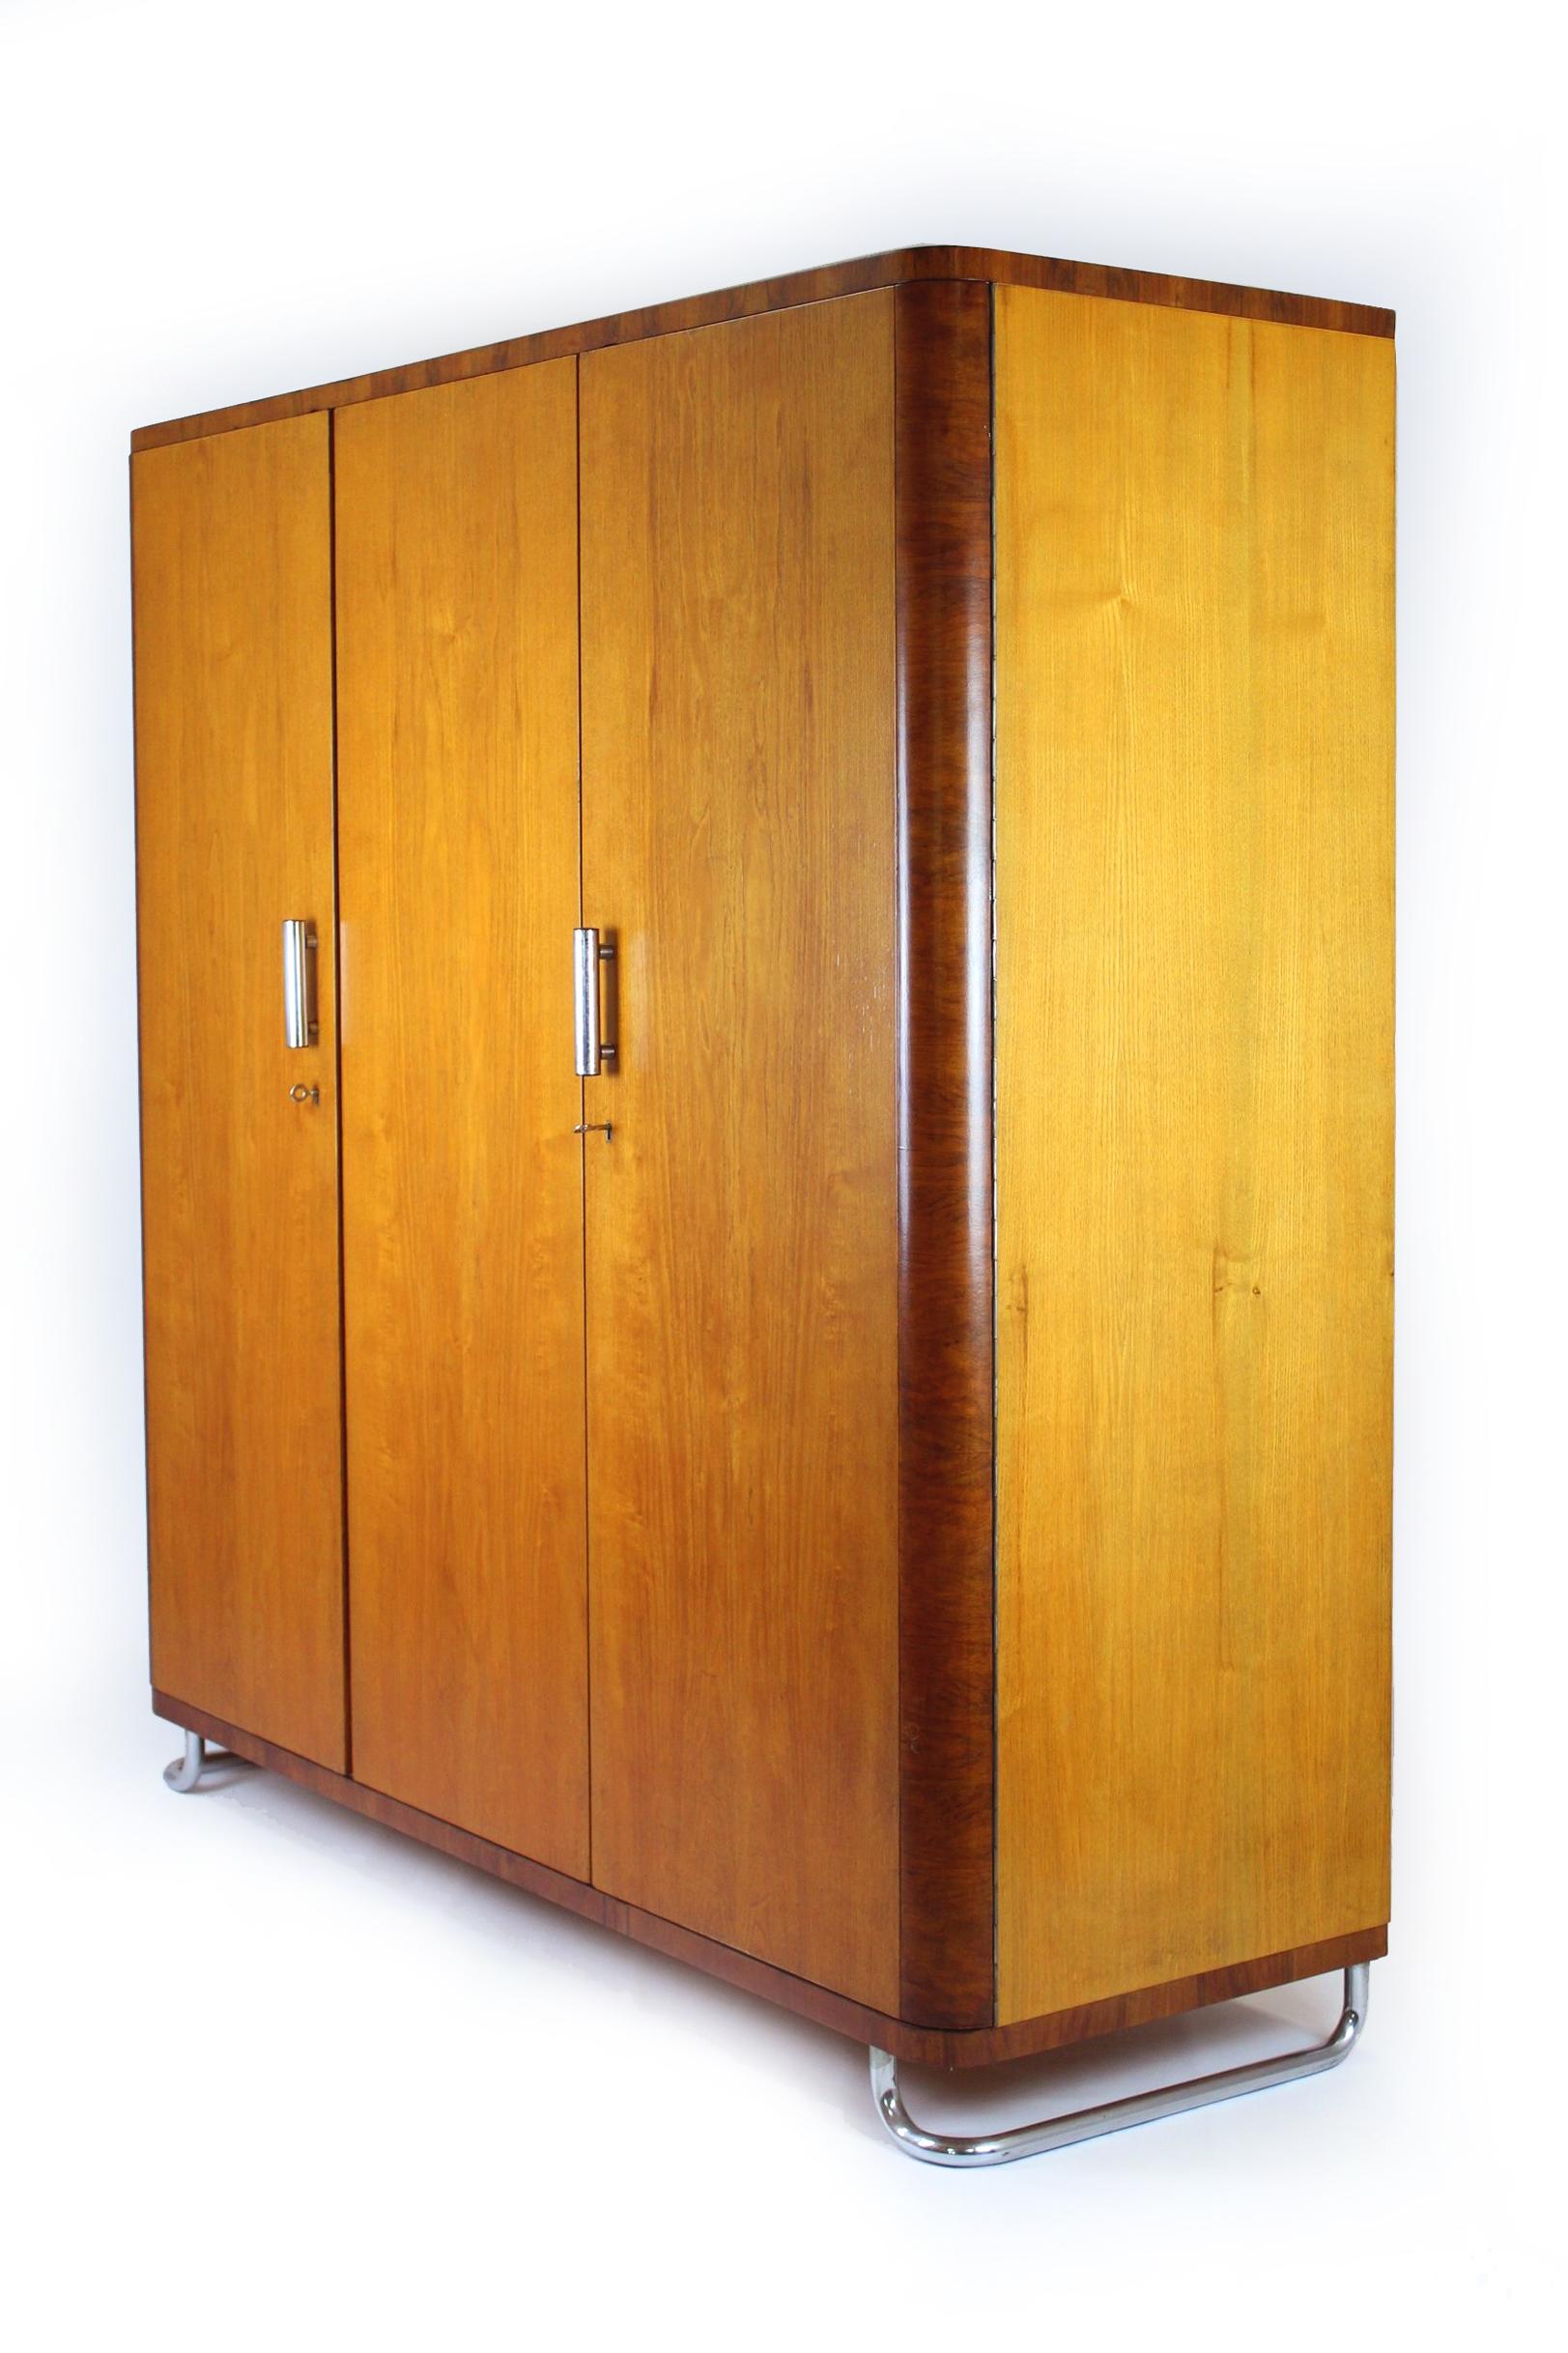 This Bauhaus-style wardrobe was produced in Czechoslovakia in the 1930s. Features three doors, an internal clothes rail and five shelves. The wardrobe stands on chromed feet and has chromed cylinder handles. Very good condition, clean.

 